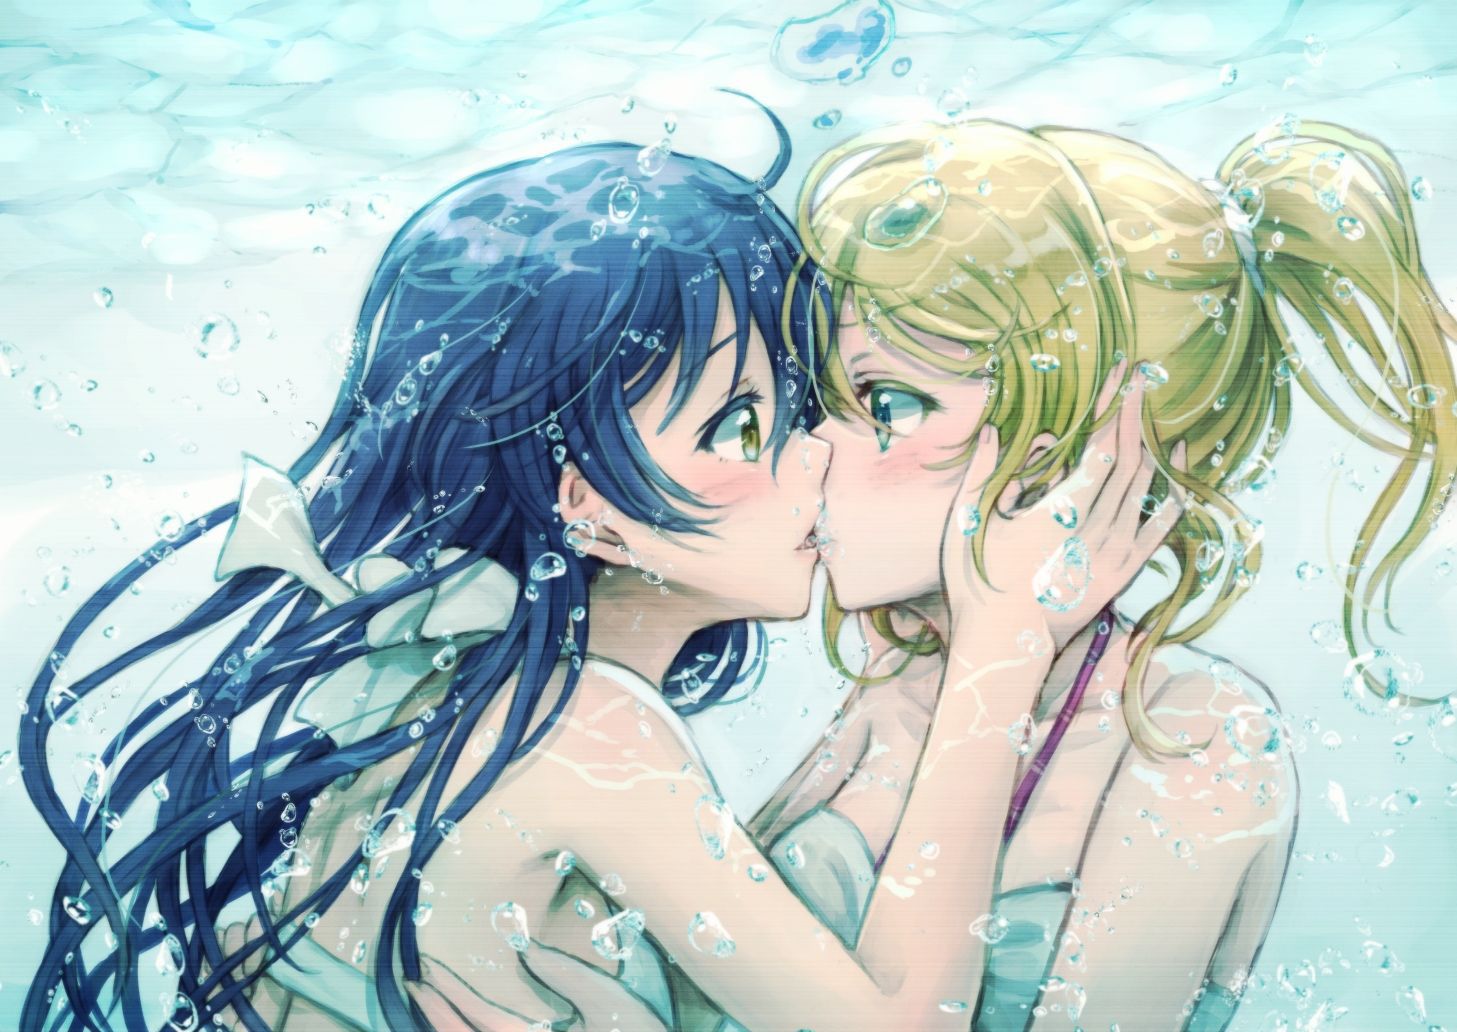 [Secondary-ZIP: Yuri lesbian image, or see other girls doing naughty things. 5